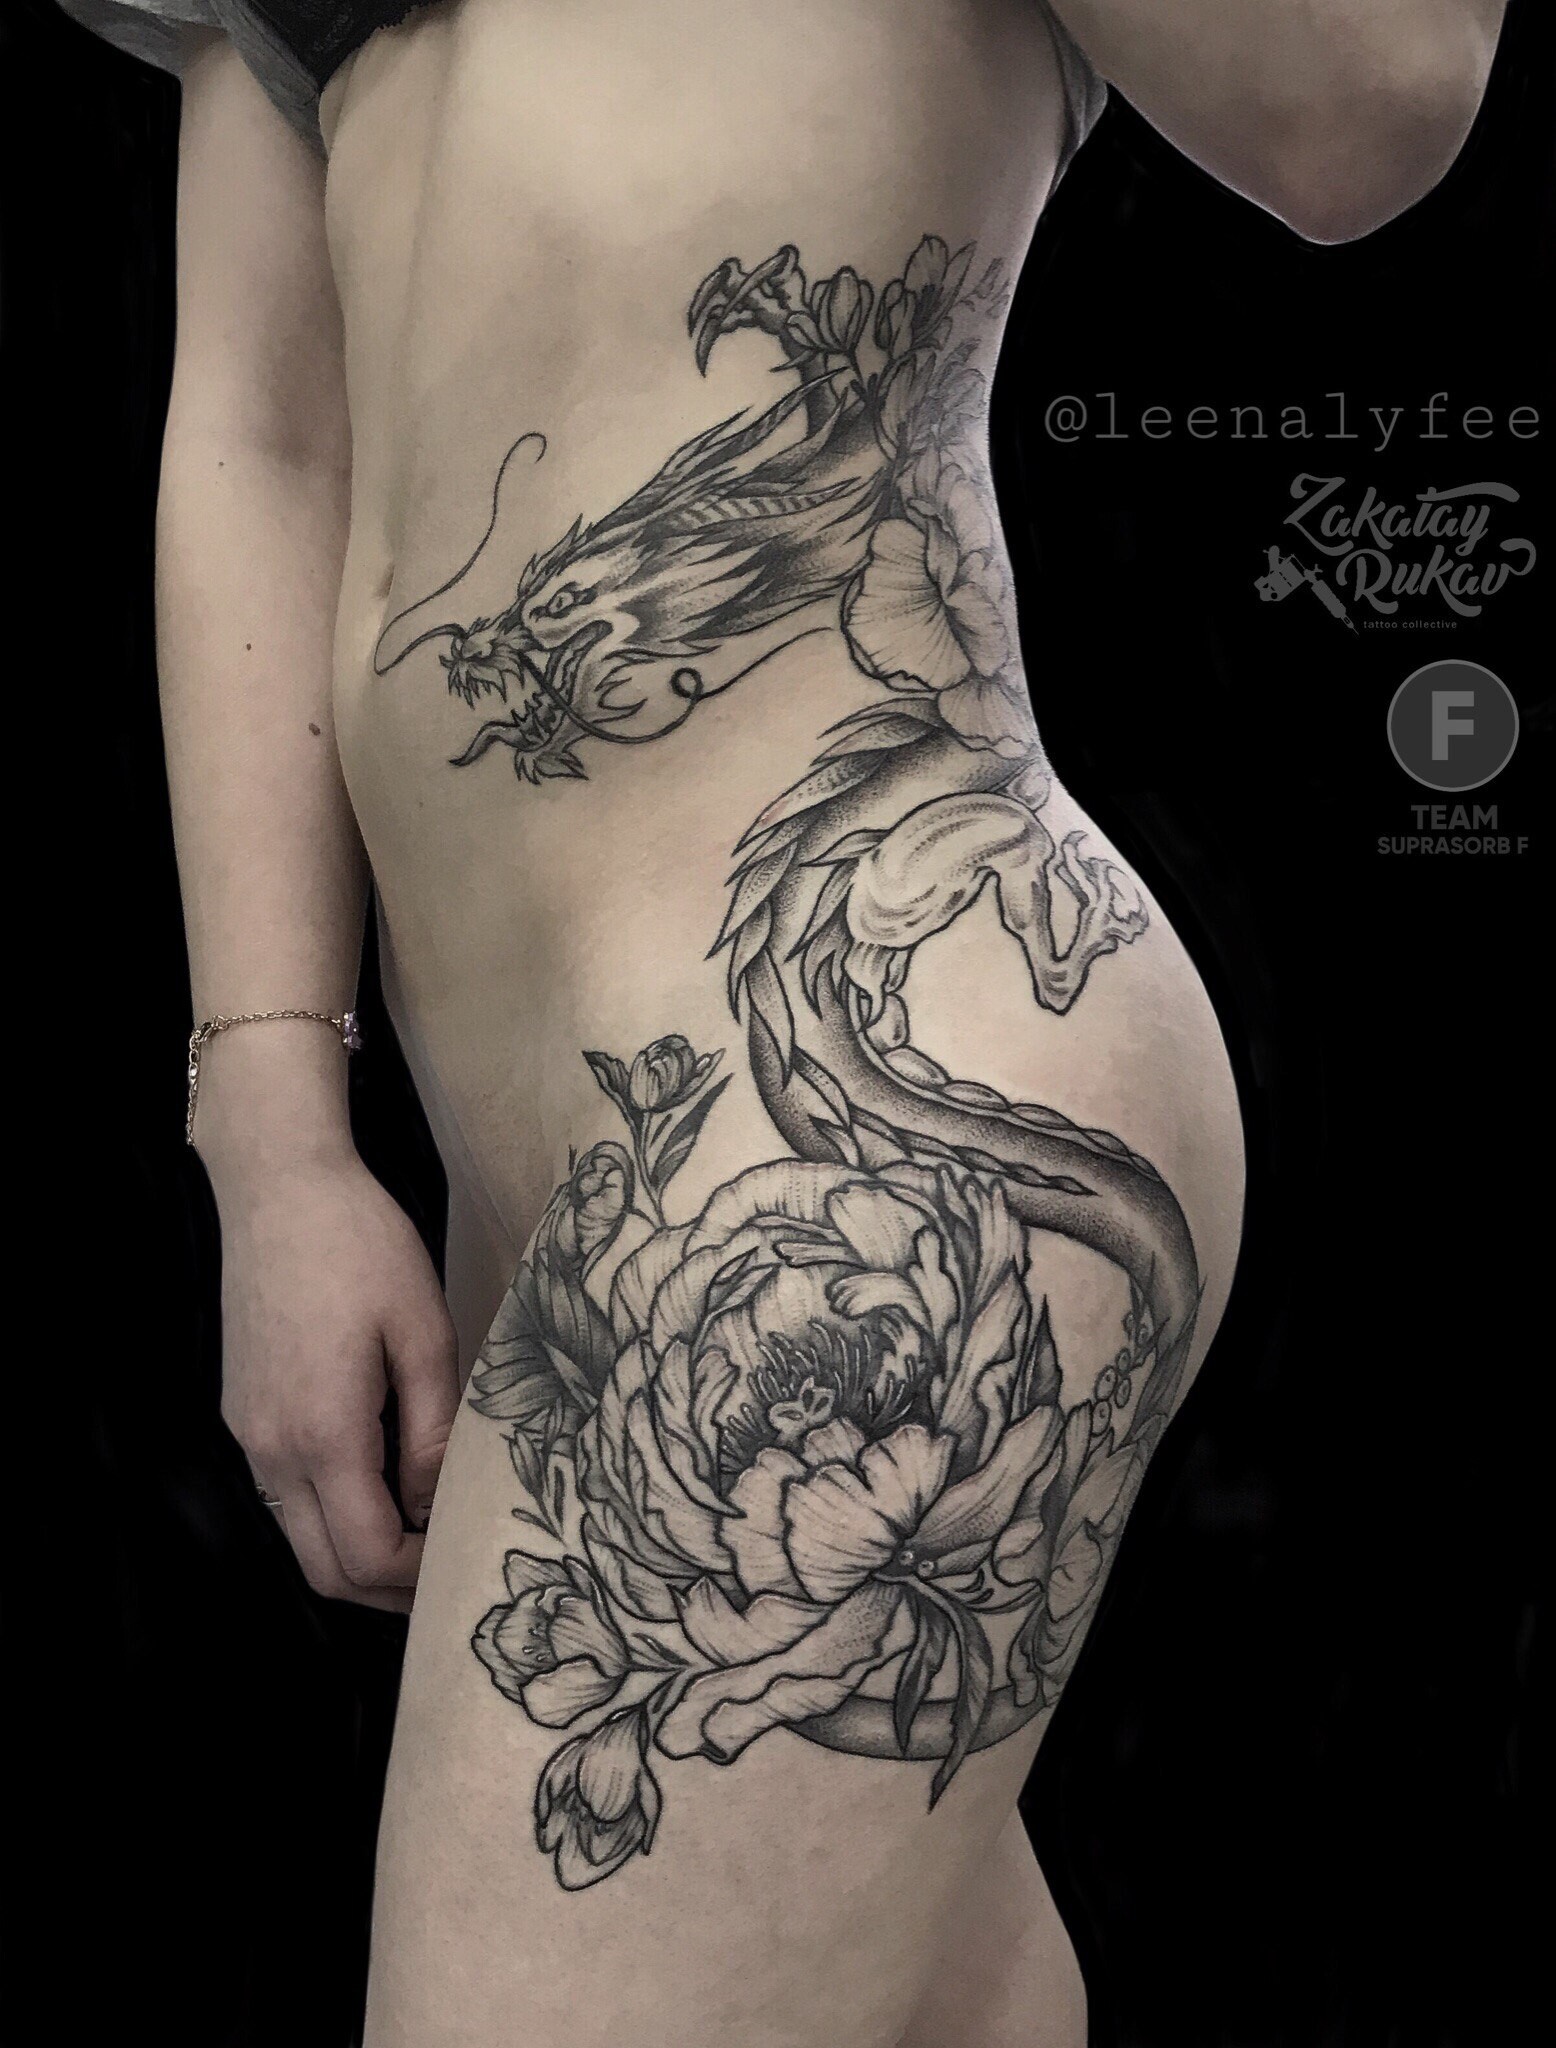 50 Red Dragon Tattoo Designs with Meaning | Art and Design